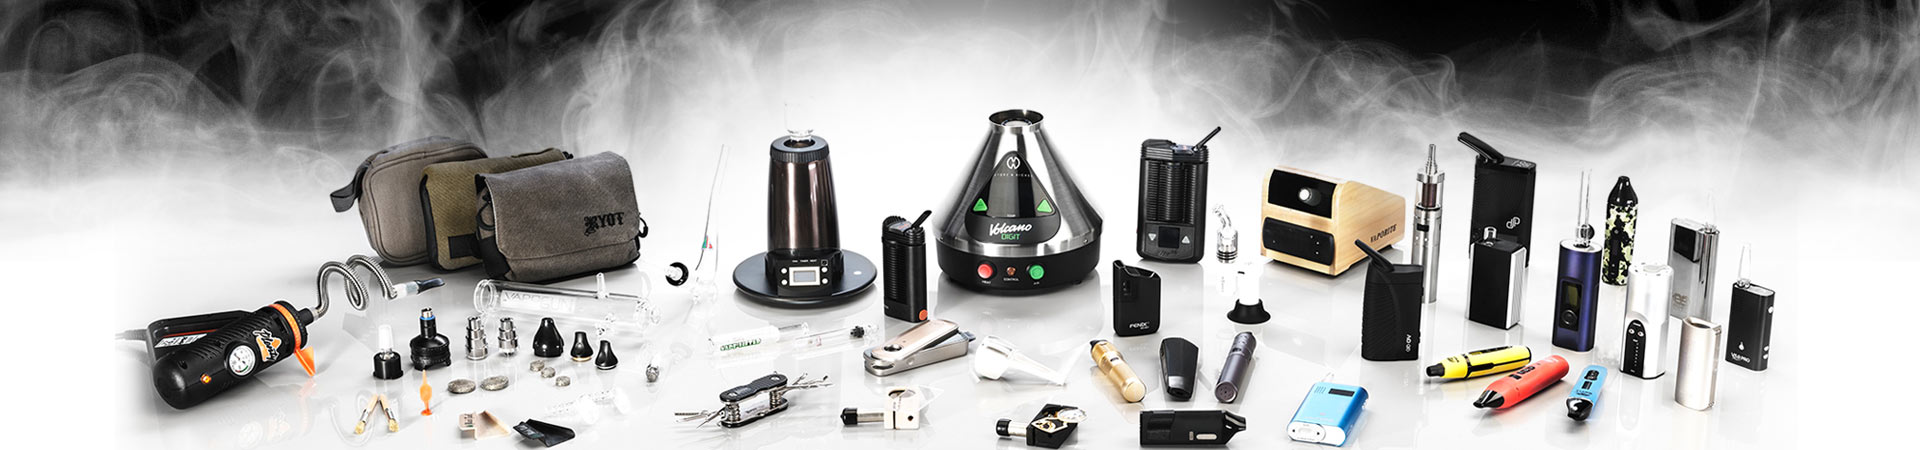 Vaporizer from Stoners for Stoners 